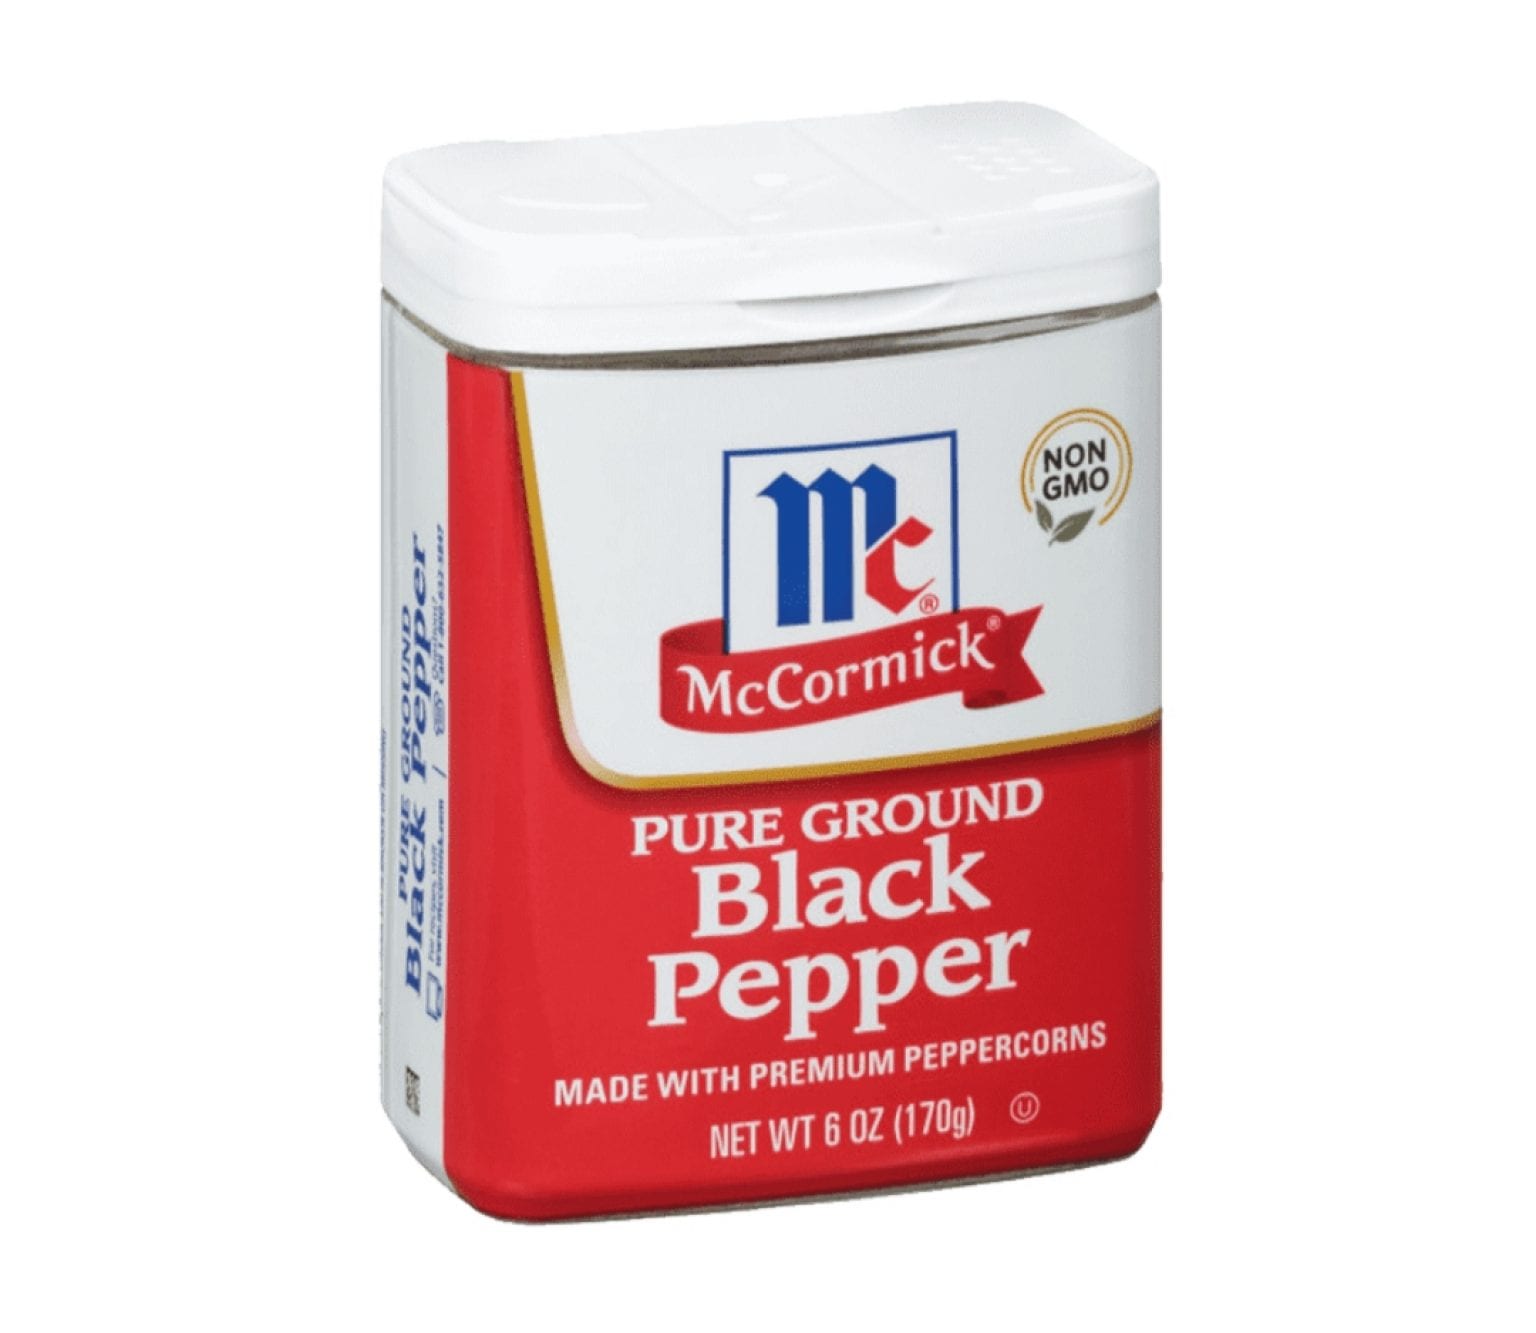 McCormick and Private Label Brands Black Pepper Class Action Lawsuit